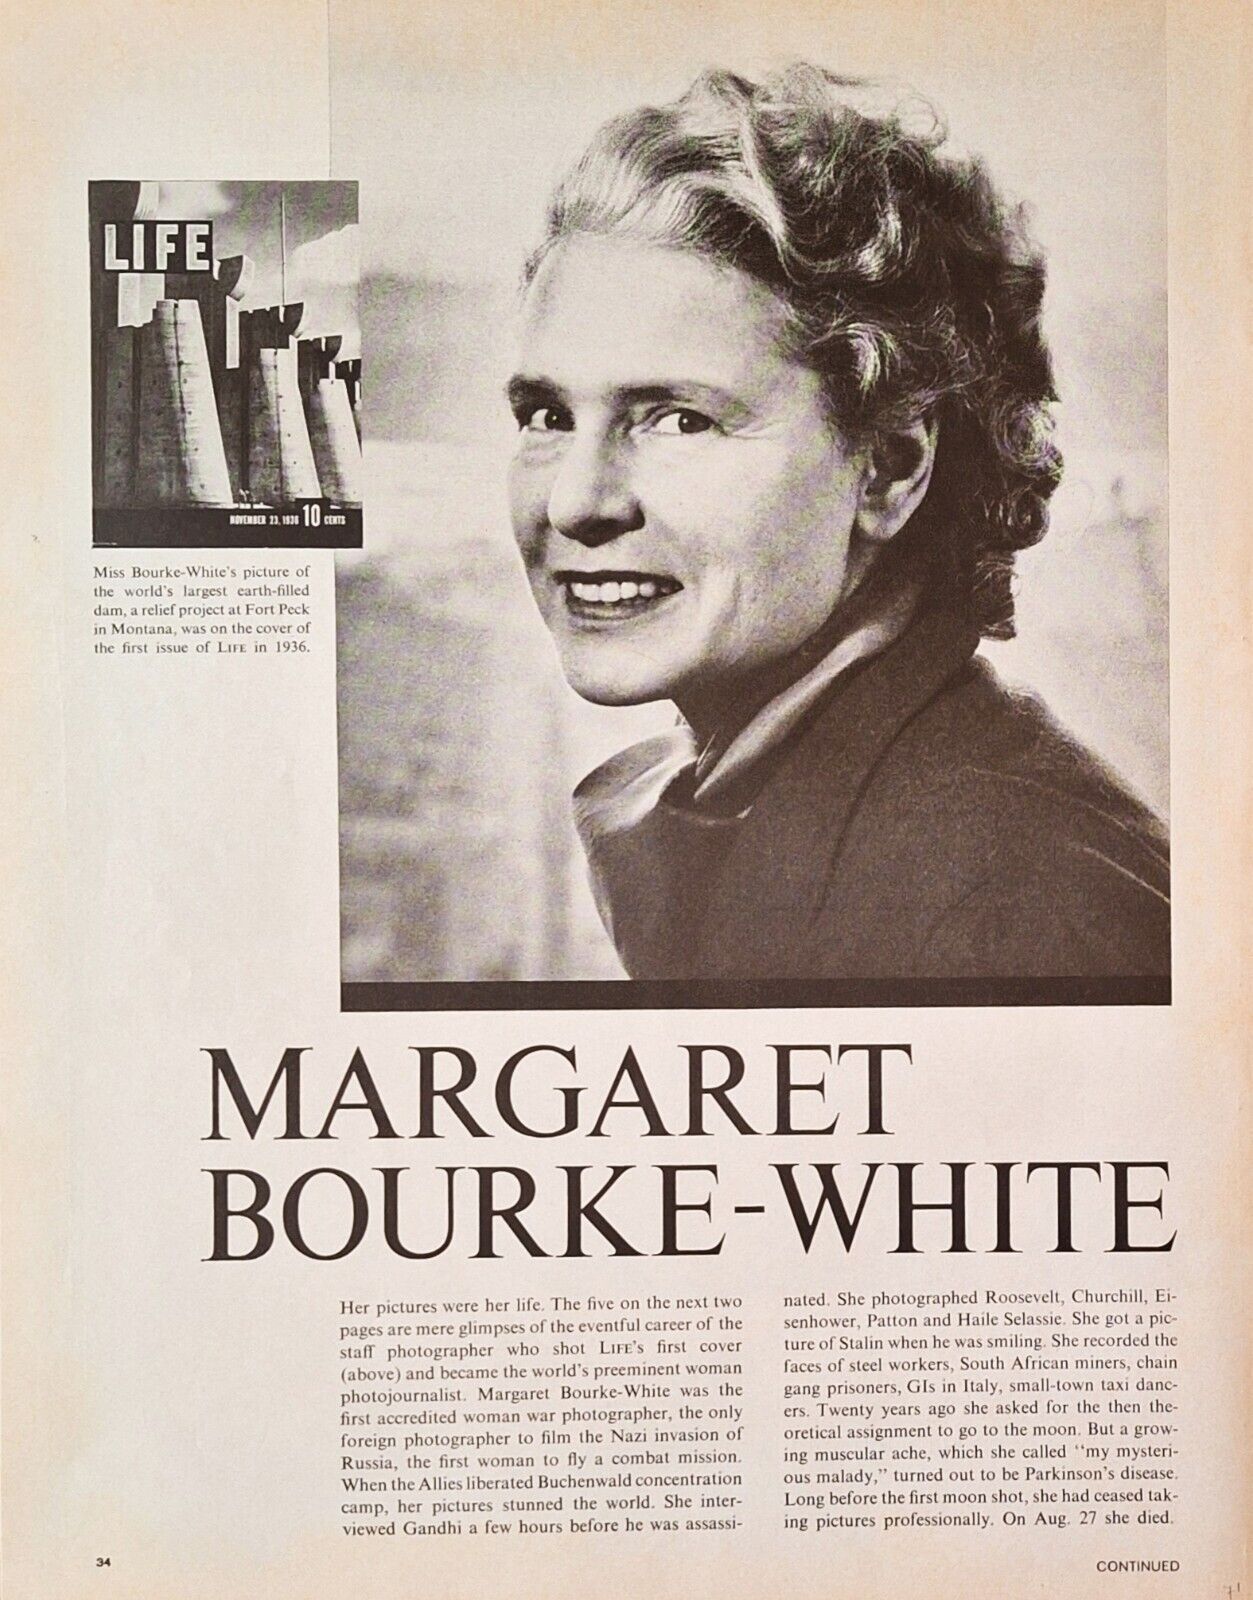 Margaret Bourke-White Photographer Three Page Photo Article from 1971